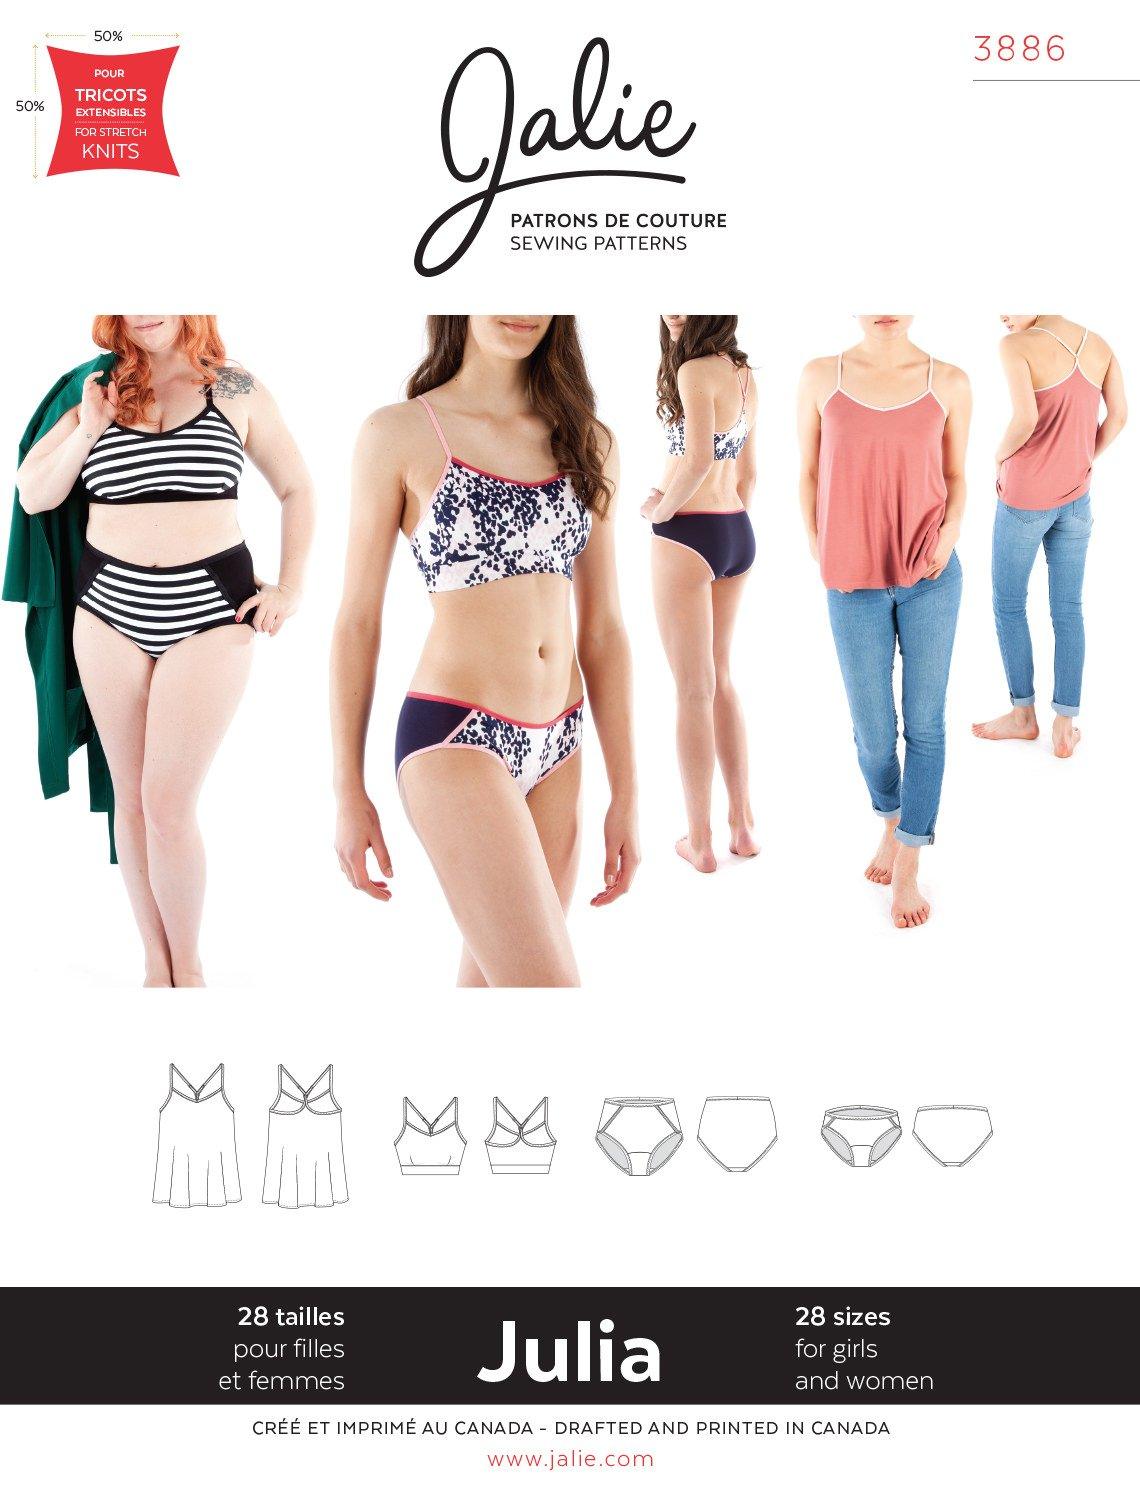 Sewing Pattern Jalie 3886 - JULIA Camisole, bralette and panties